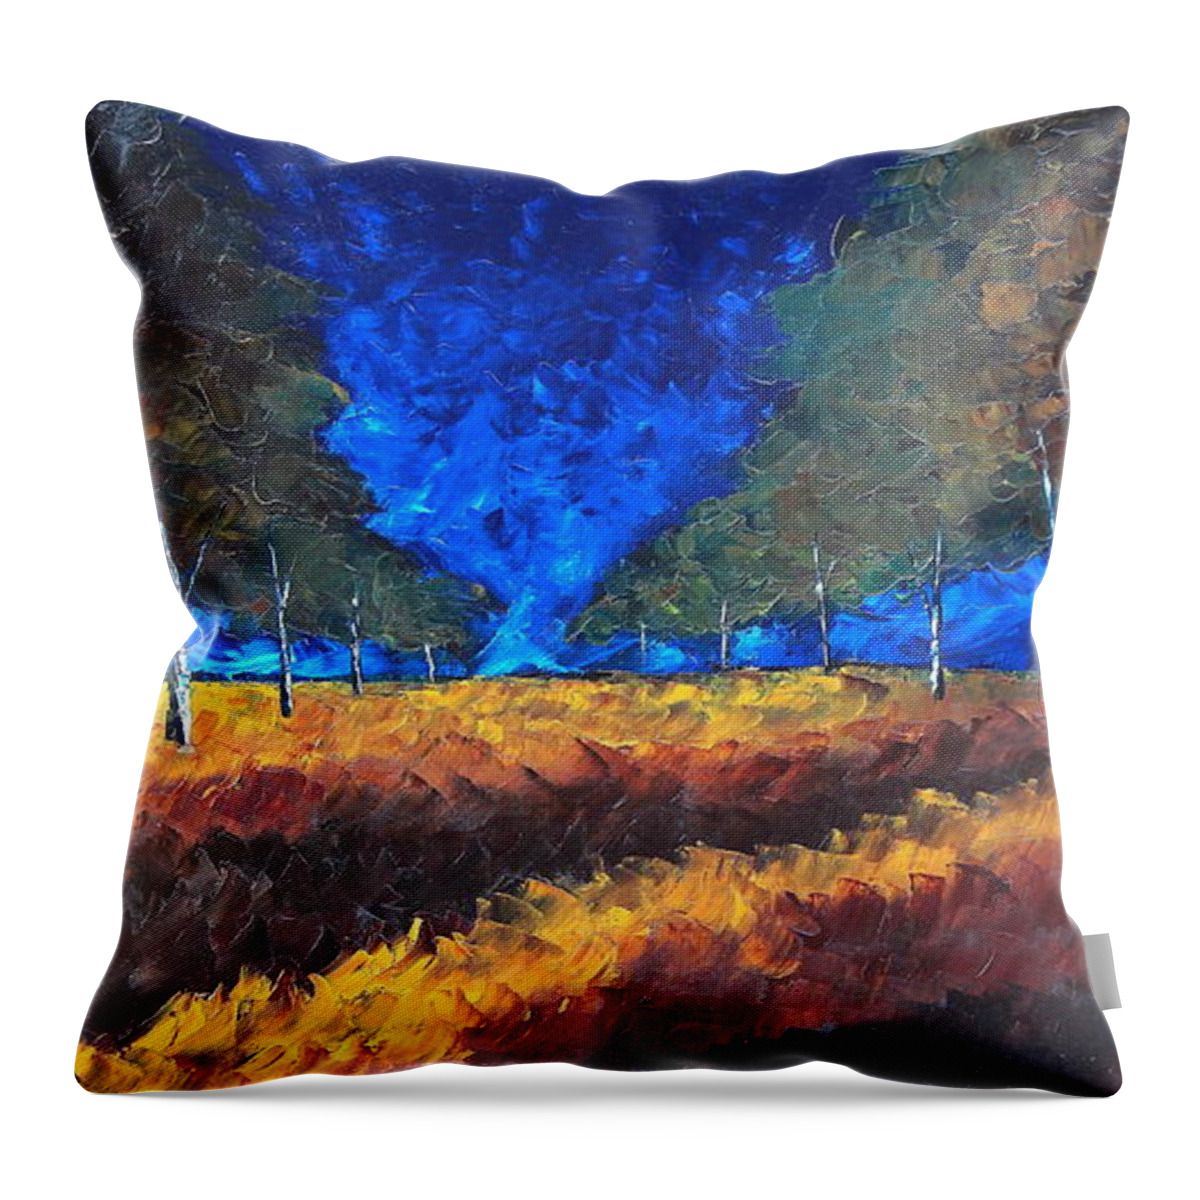 Blue Throw Pillow featuring the painting Always Dreaming by Steven Lebron Langston